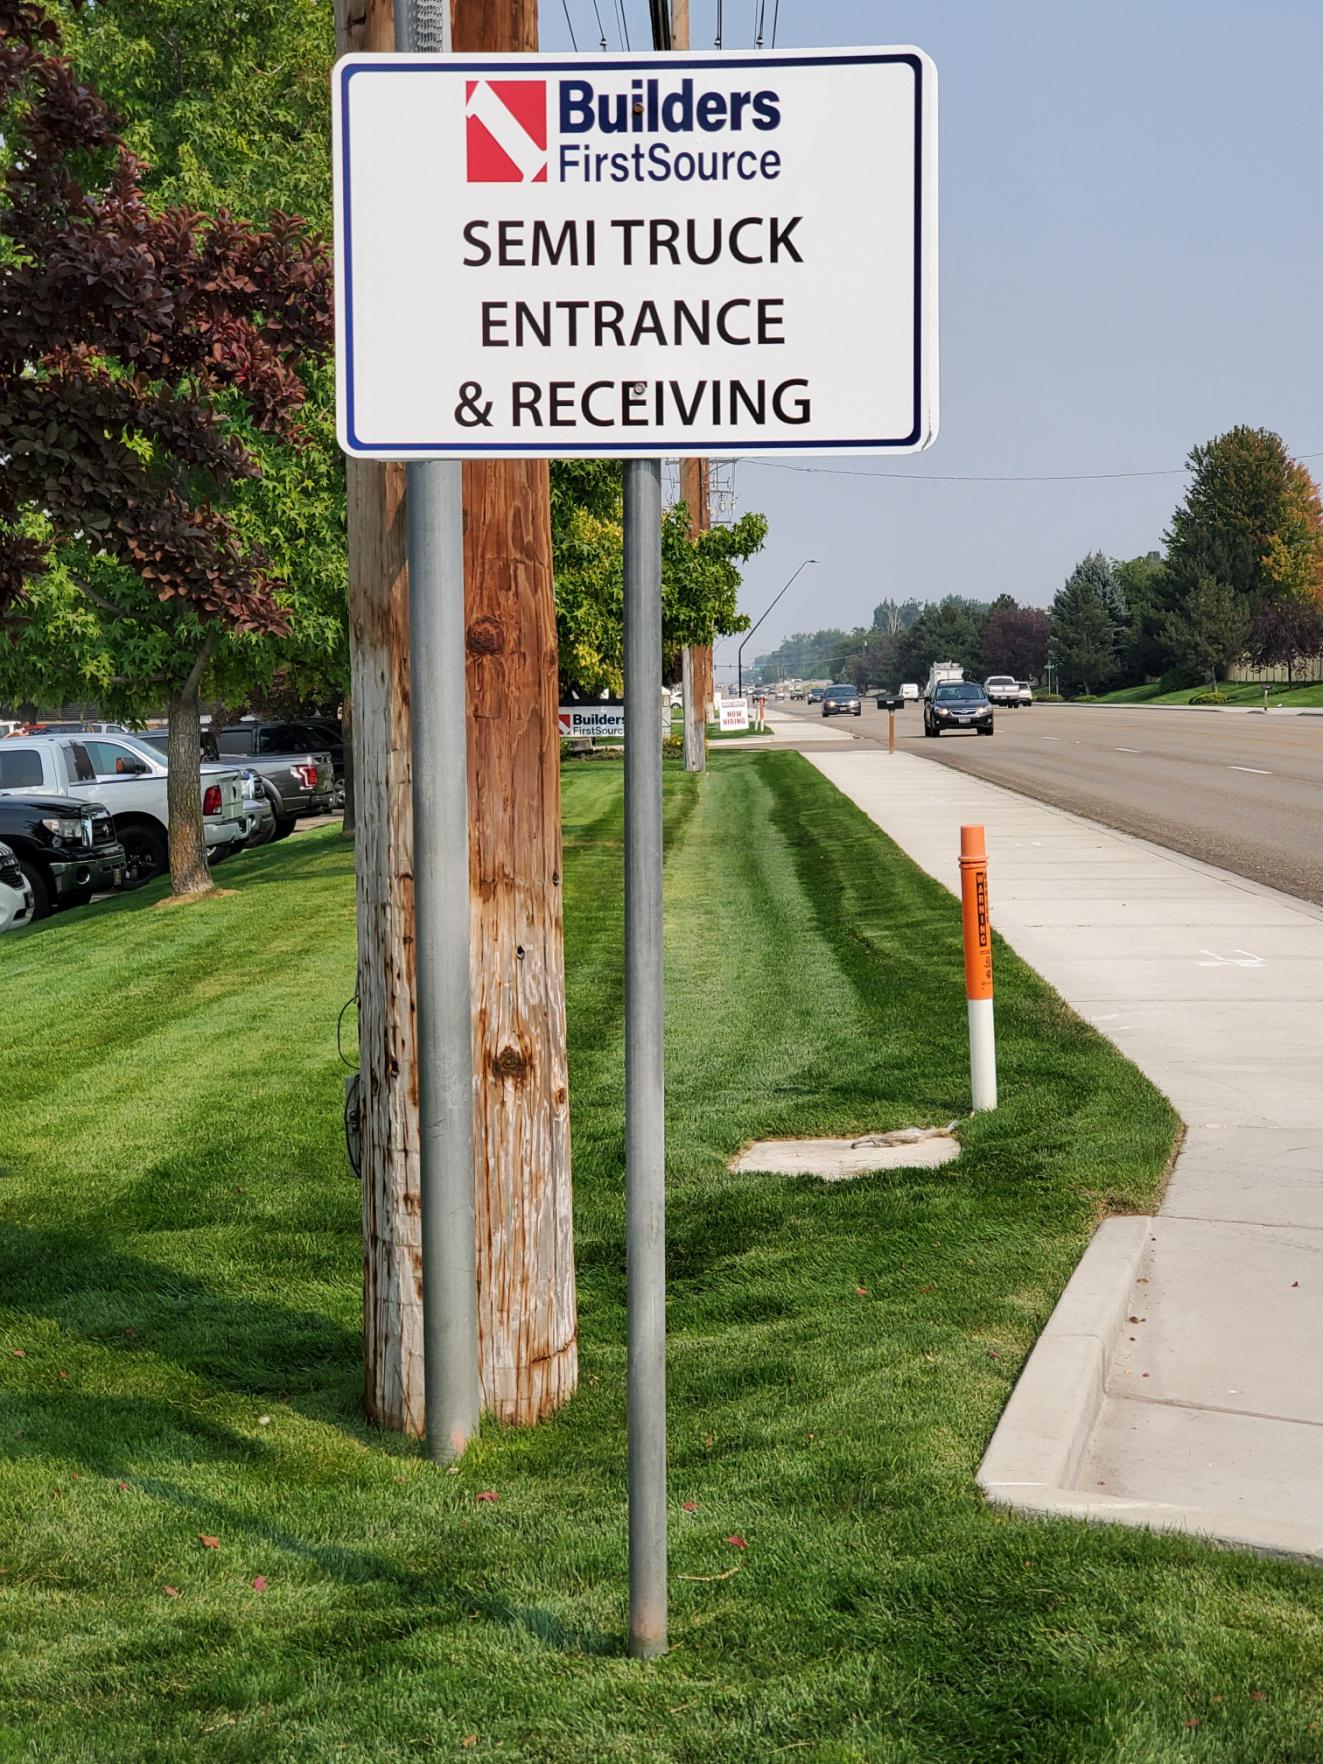 Builders FirstSource truck entrance and receiving sign in Boise ID.